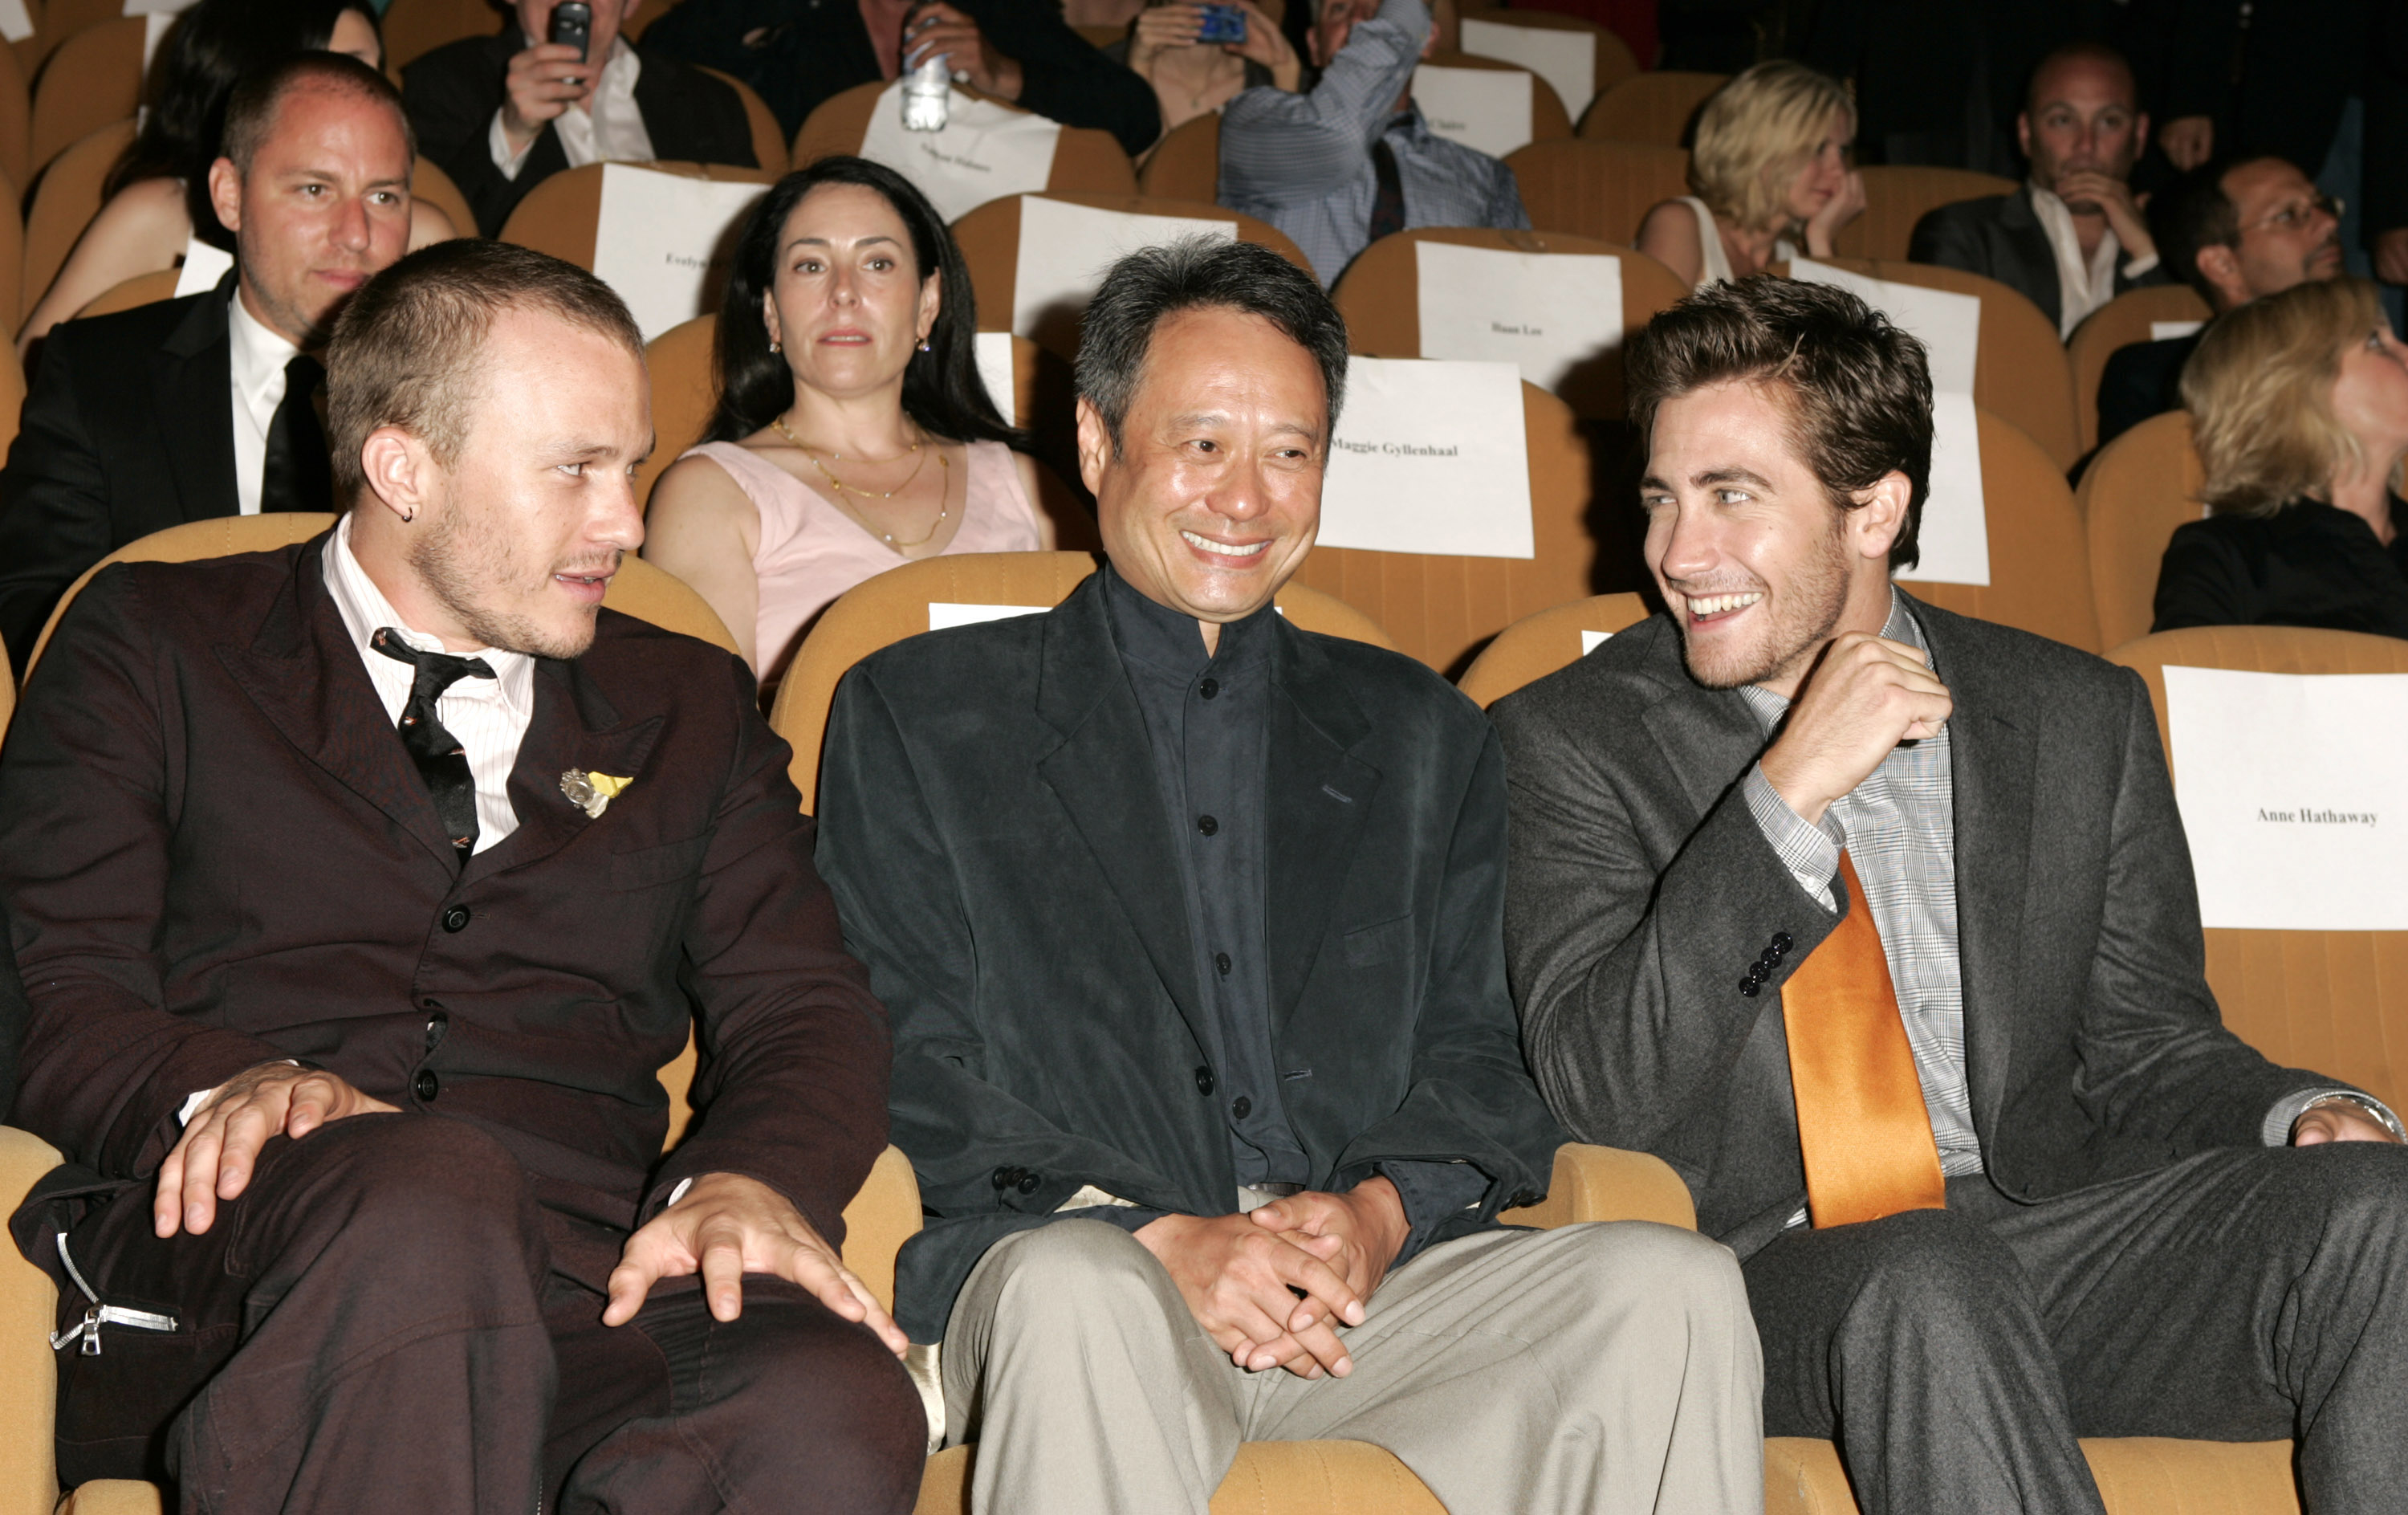 Heath and Jake, wearing ties, sitting with Brokeback Mountain director Ang Lee in a theater